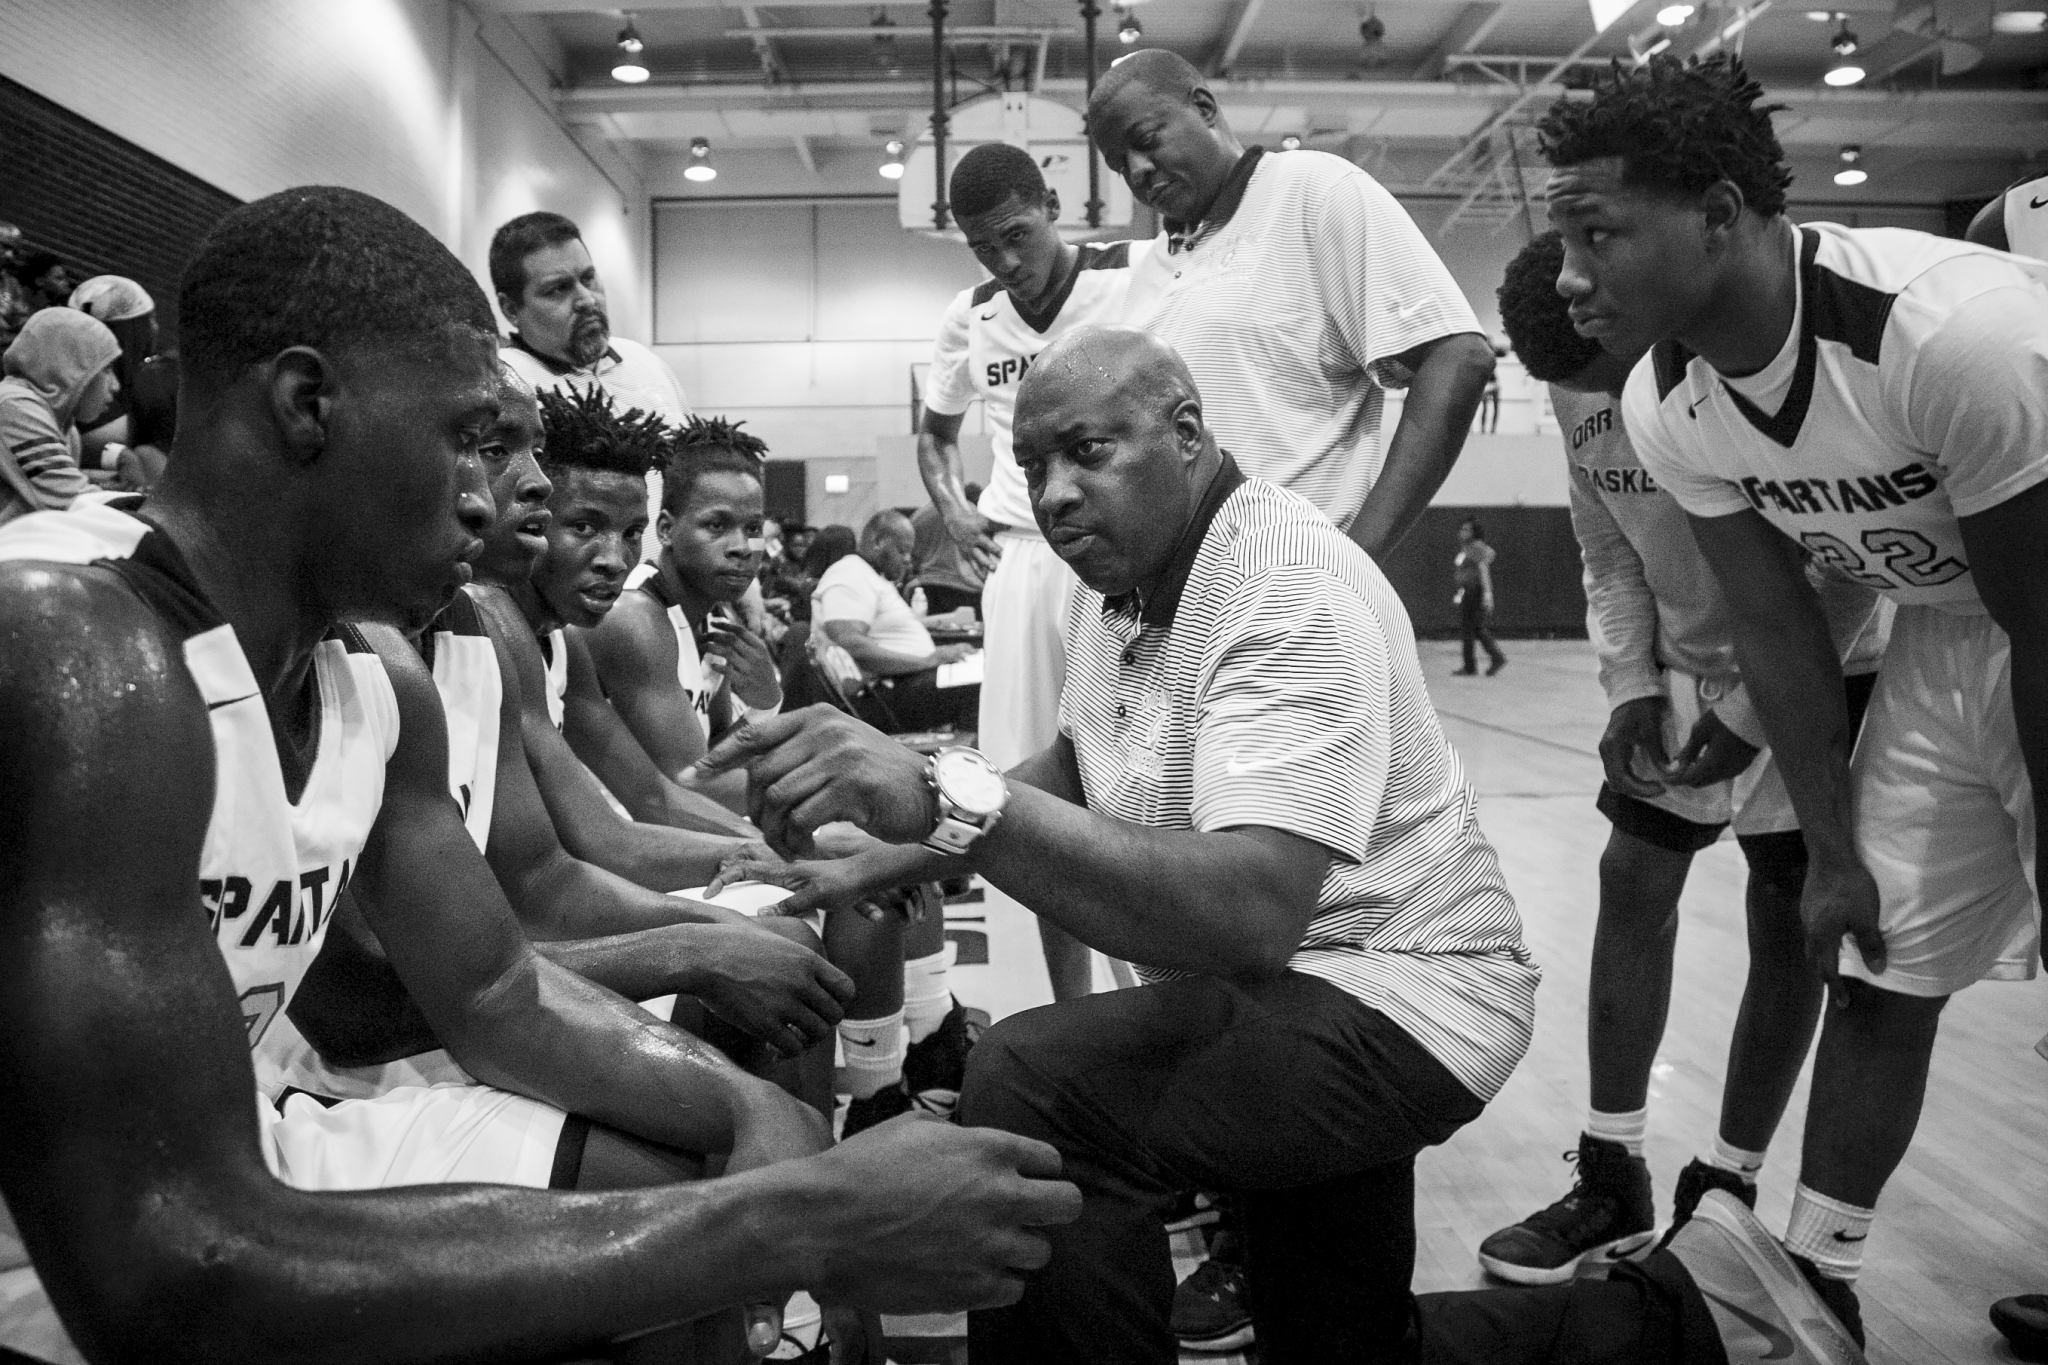 Coach Lou Adams talks to his players during a timeout against North Lawndale College Prep High School at Orr Academy High School, Jan. 13, 2017.